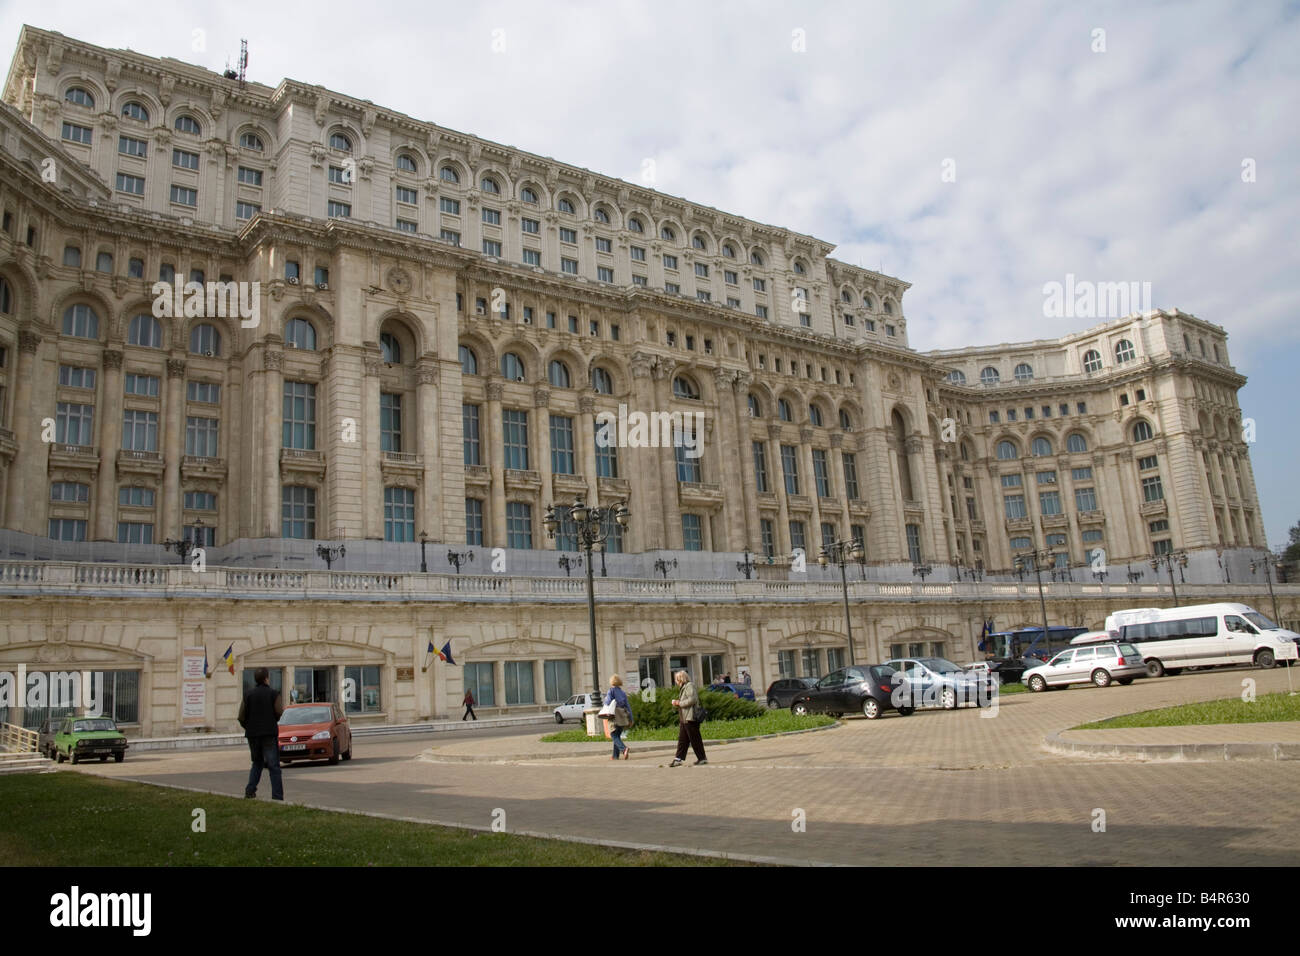 Bucharest Romania Europe EU Casa Poporului House of the People started by Nicholae Ceausescu in 1984  most expensive administrative building in world Stock Photo